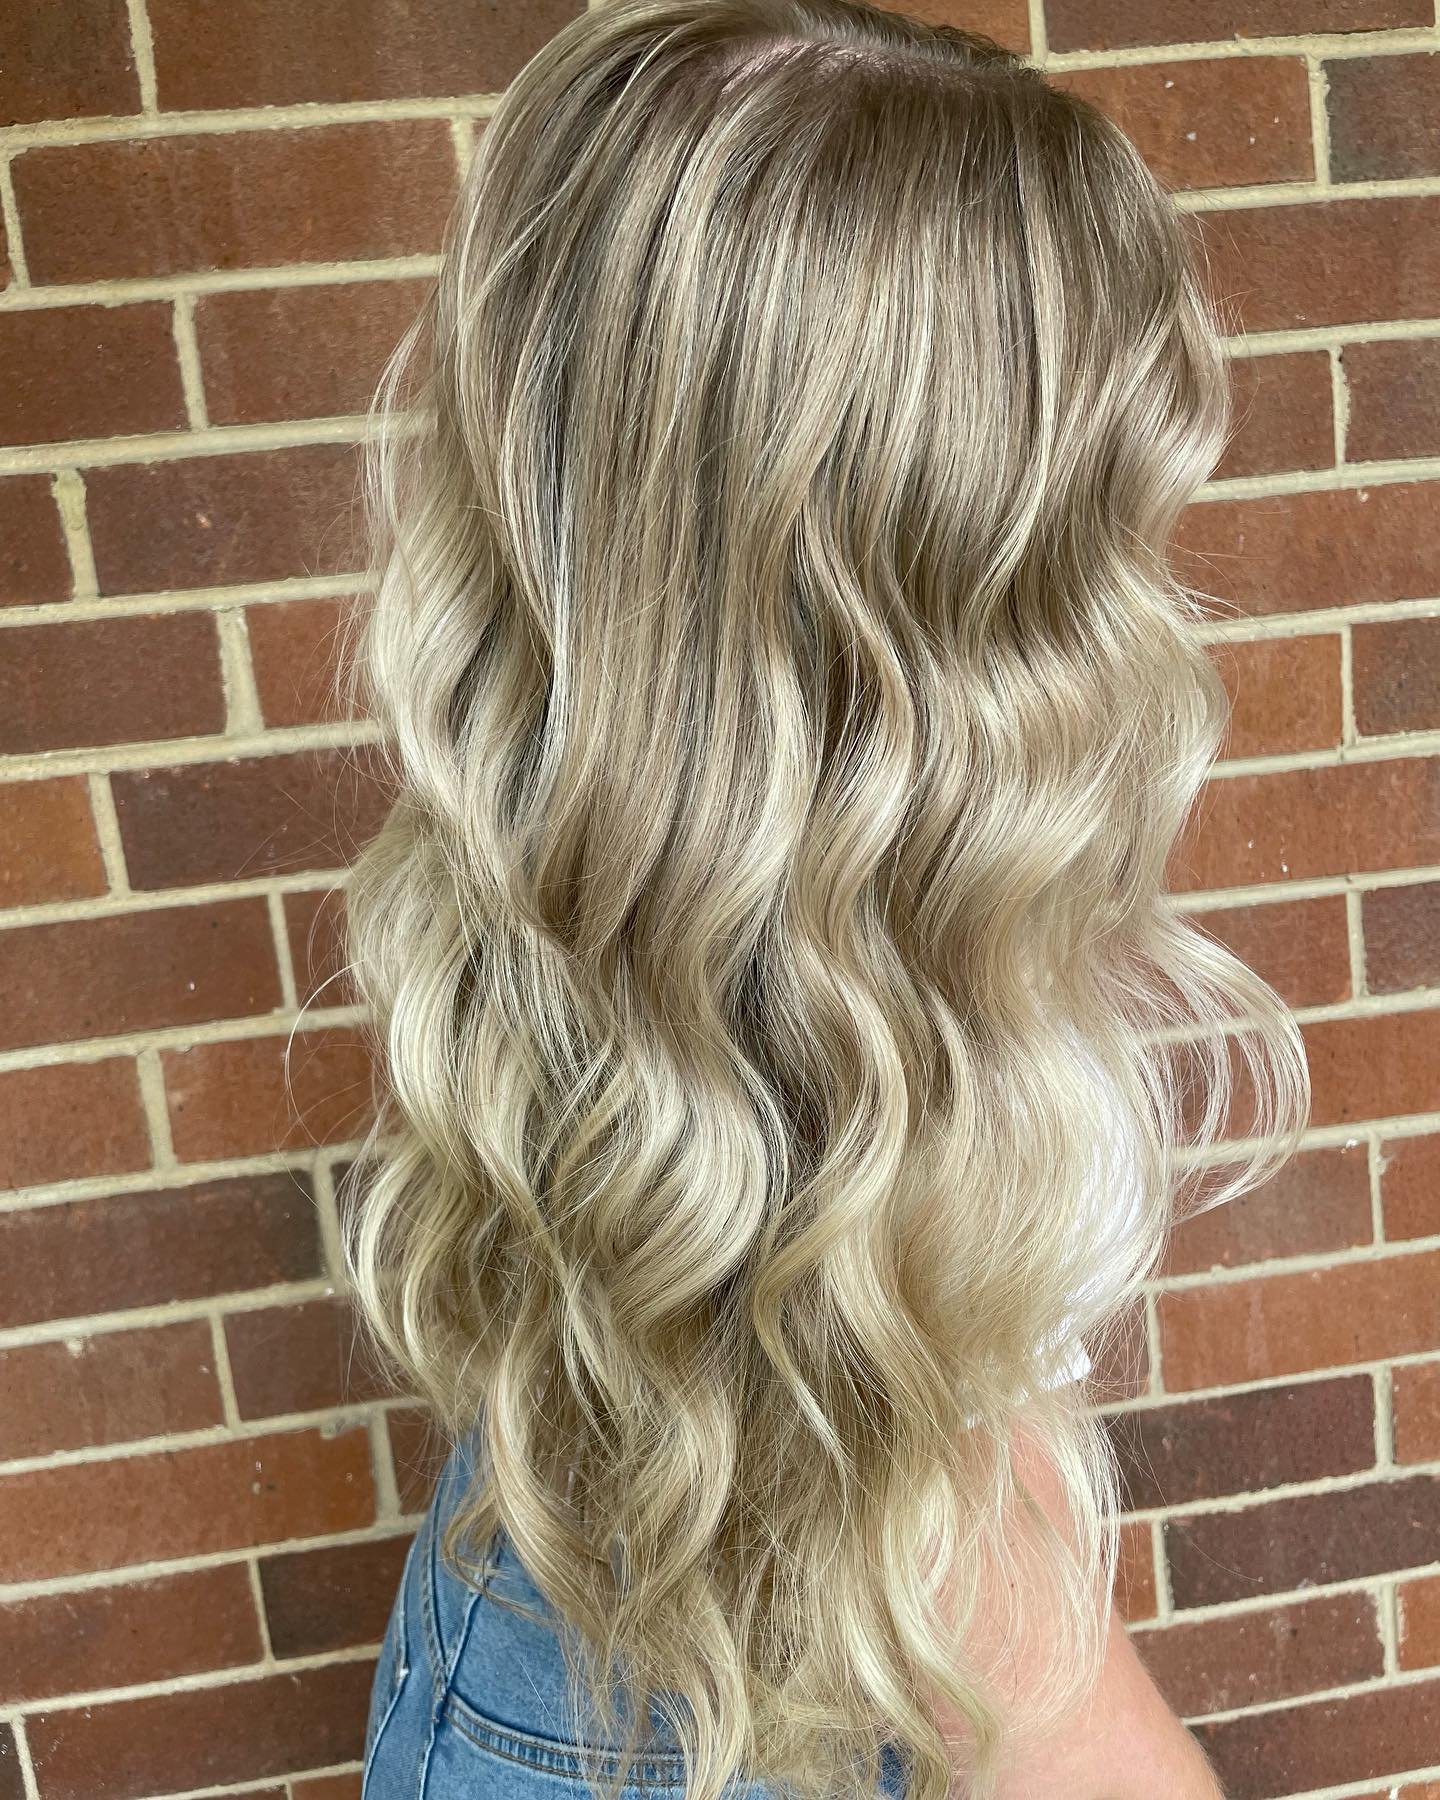 One of the greatest heads of hair of our time 😉
#HBK #HairByKimberlyKoster #summerhaircolor #BlondeBalayage